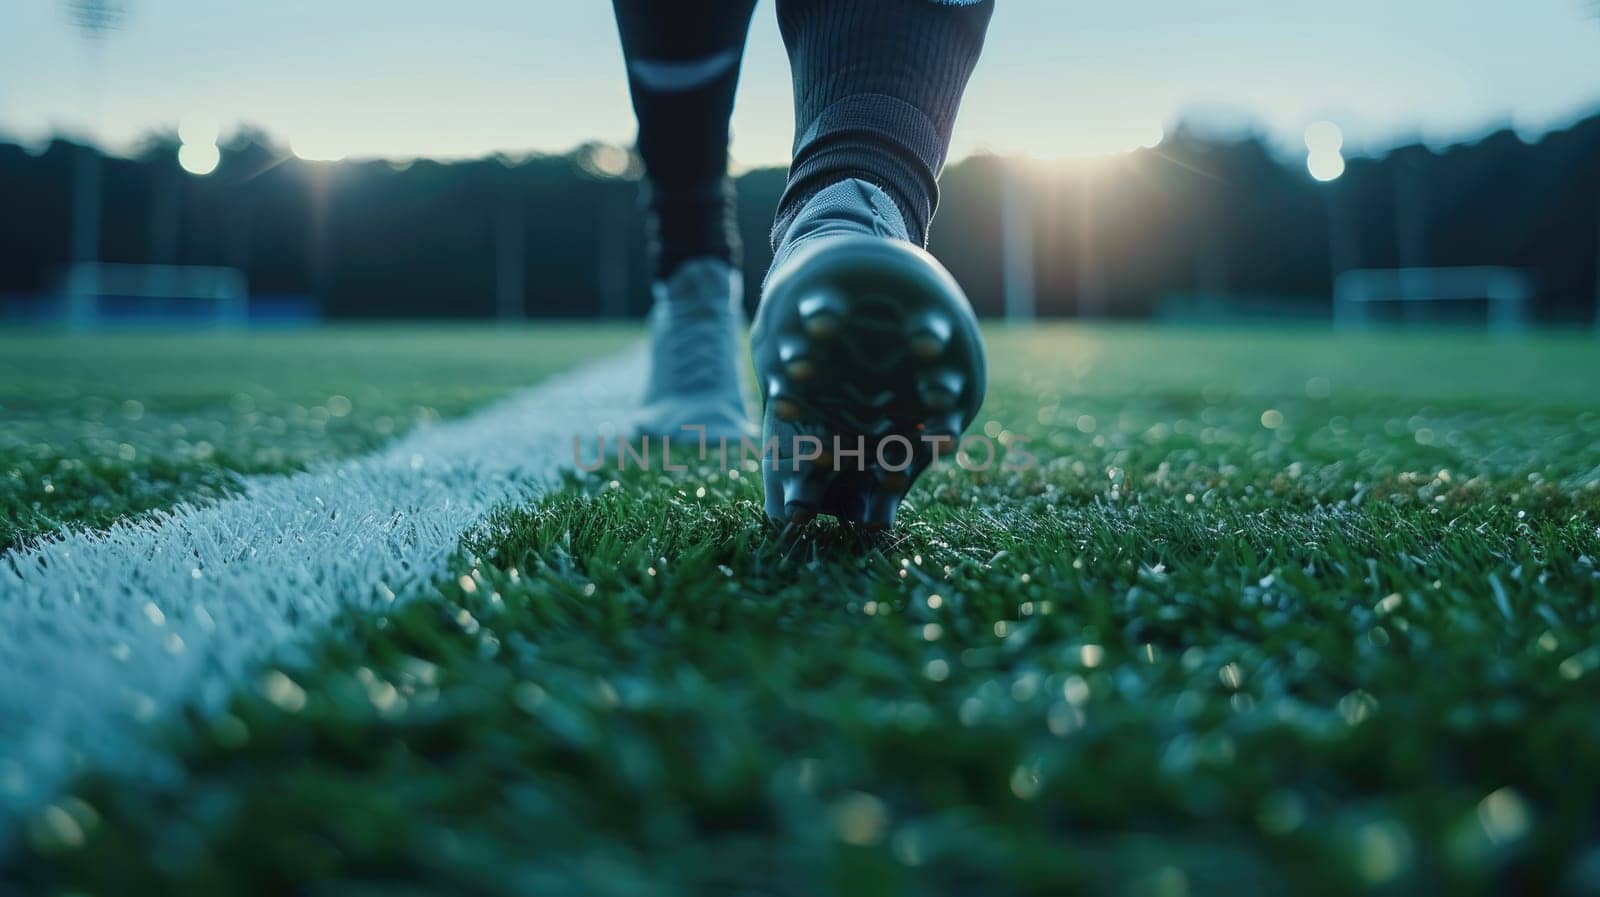 A athlete's feet in soccer shoes in the stadium, Soccer player feet standing on the green grass at stadium by nijieimu